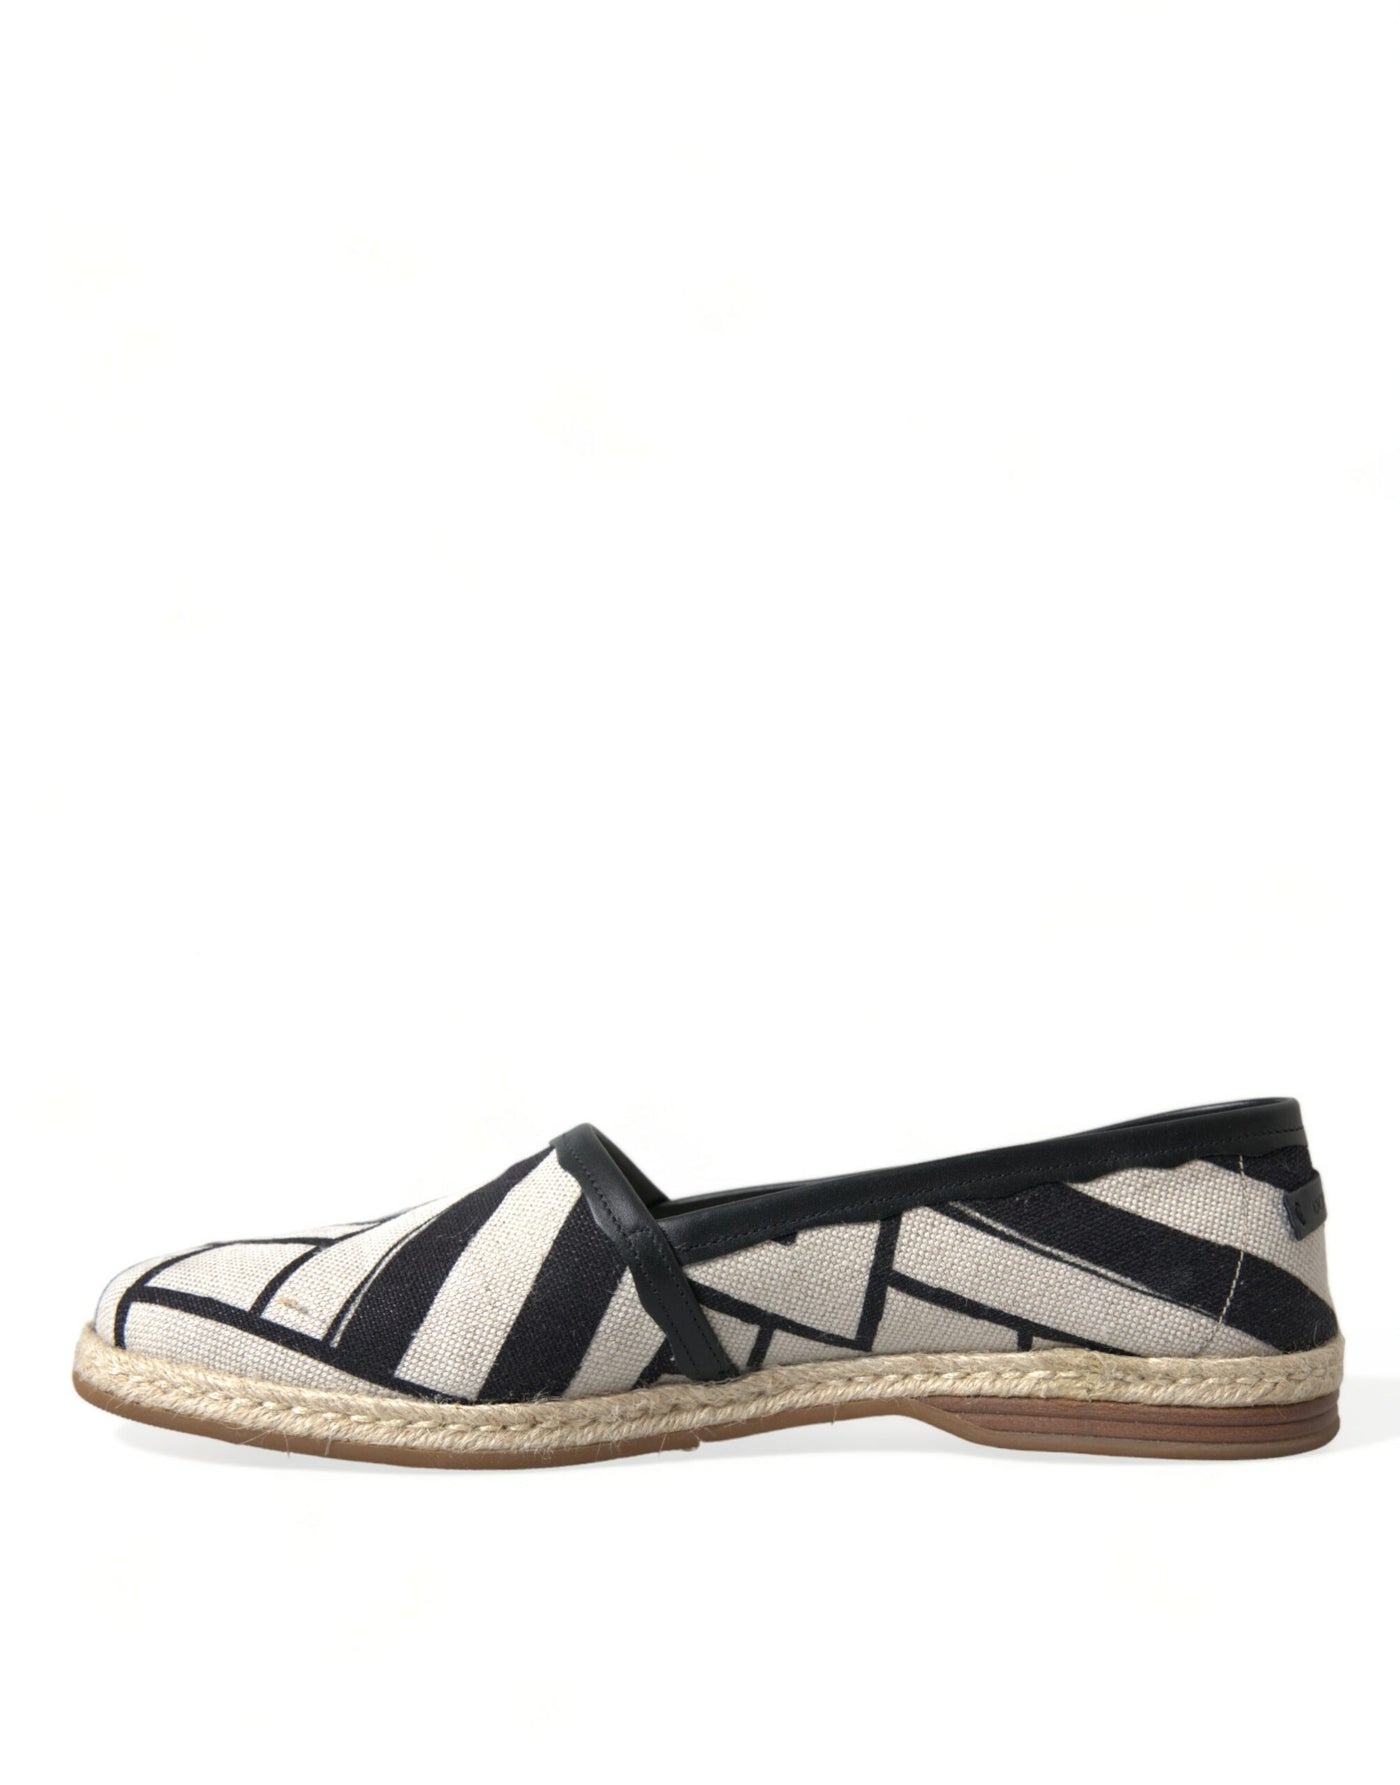 Chic Striped Luxury Leather Espadrilles